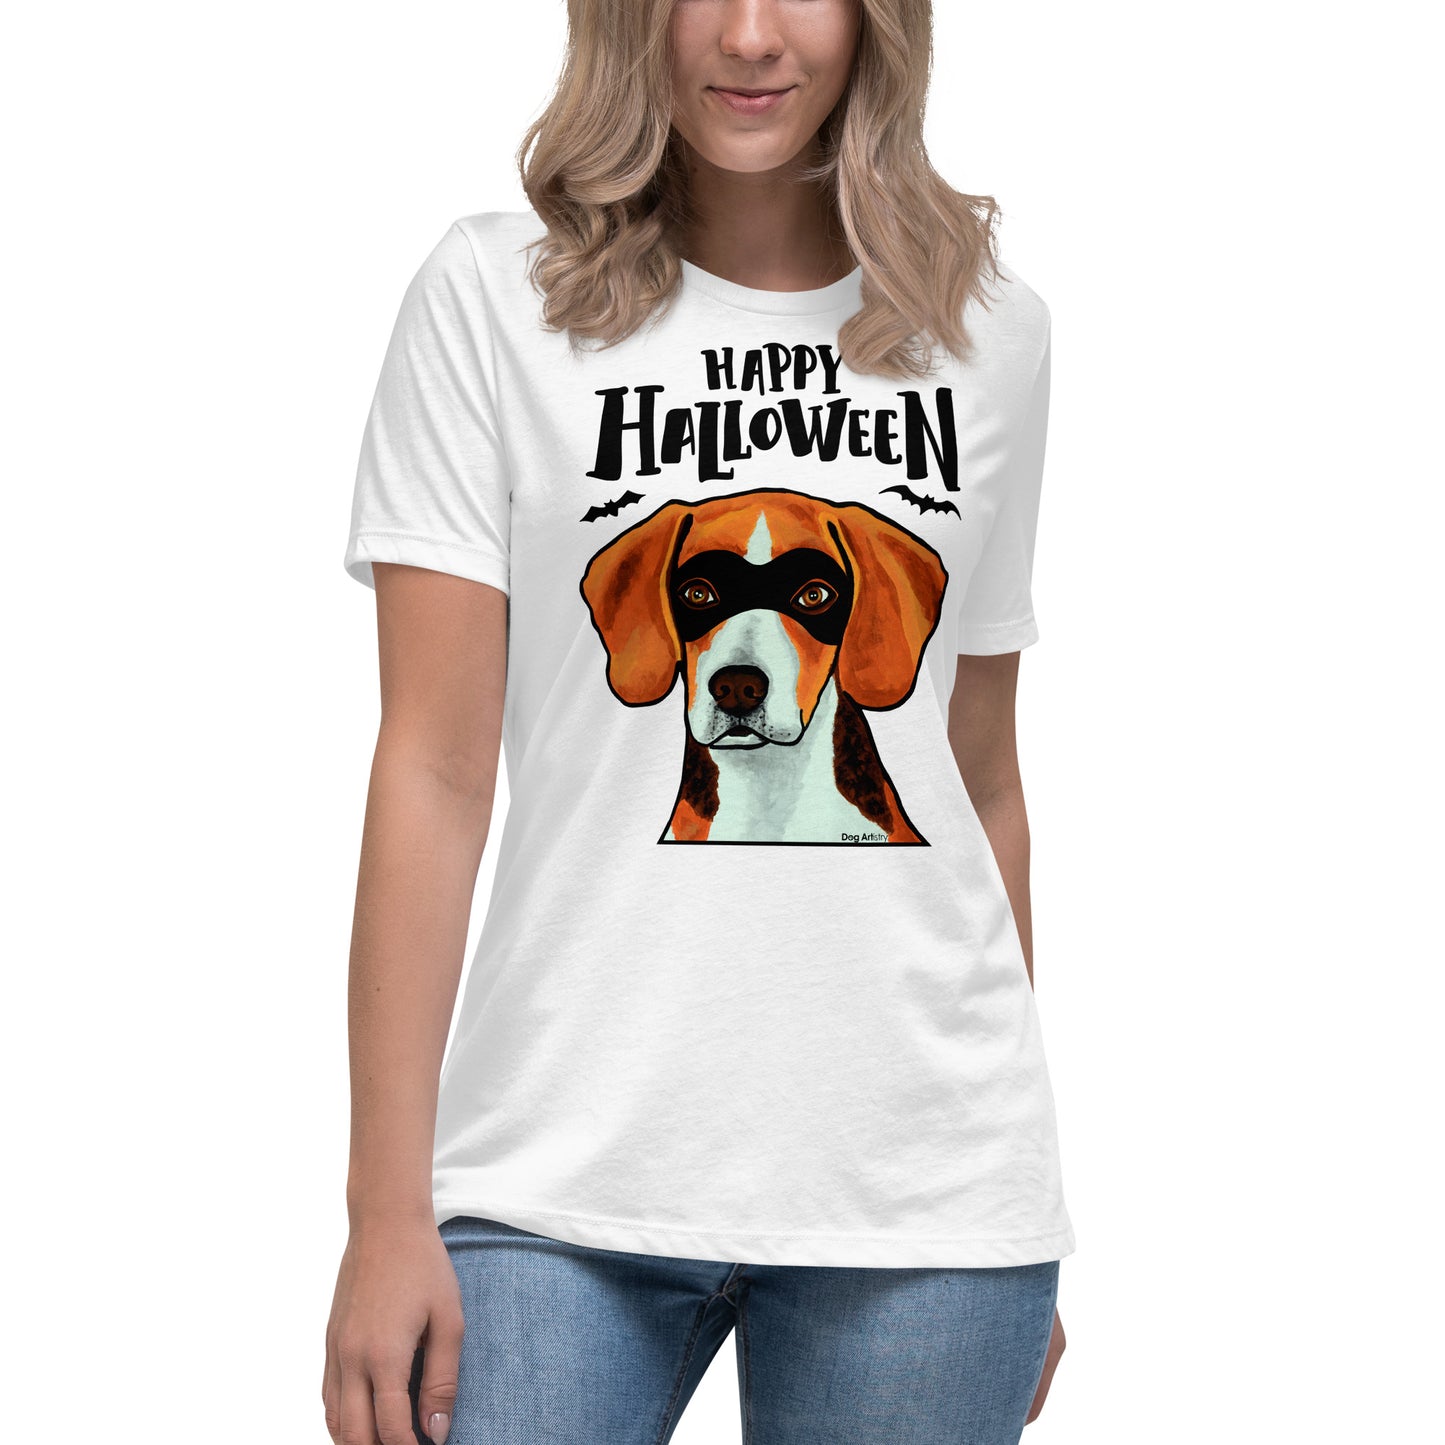 Funny Happy Halloween Beagle wearing mask women’s white t-shirt by Dog Artistry.